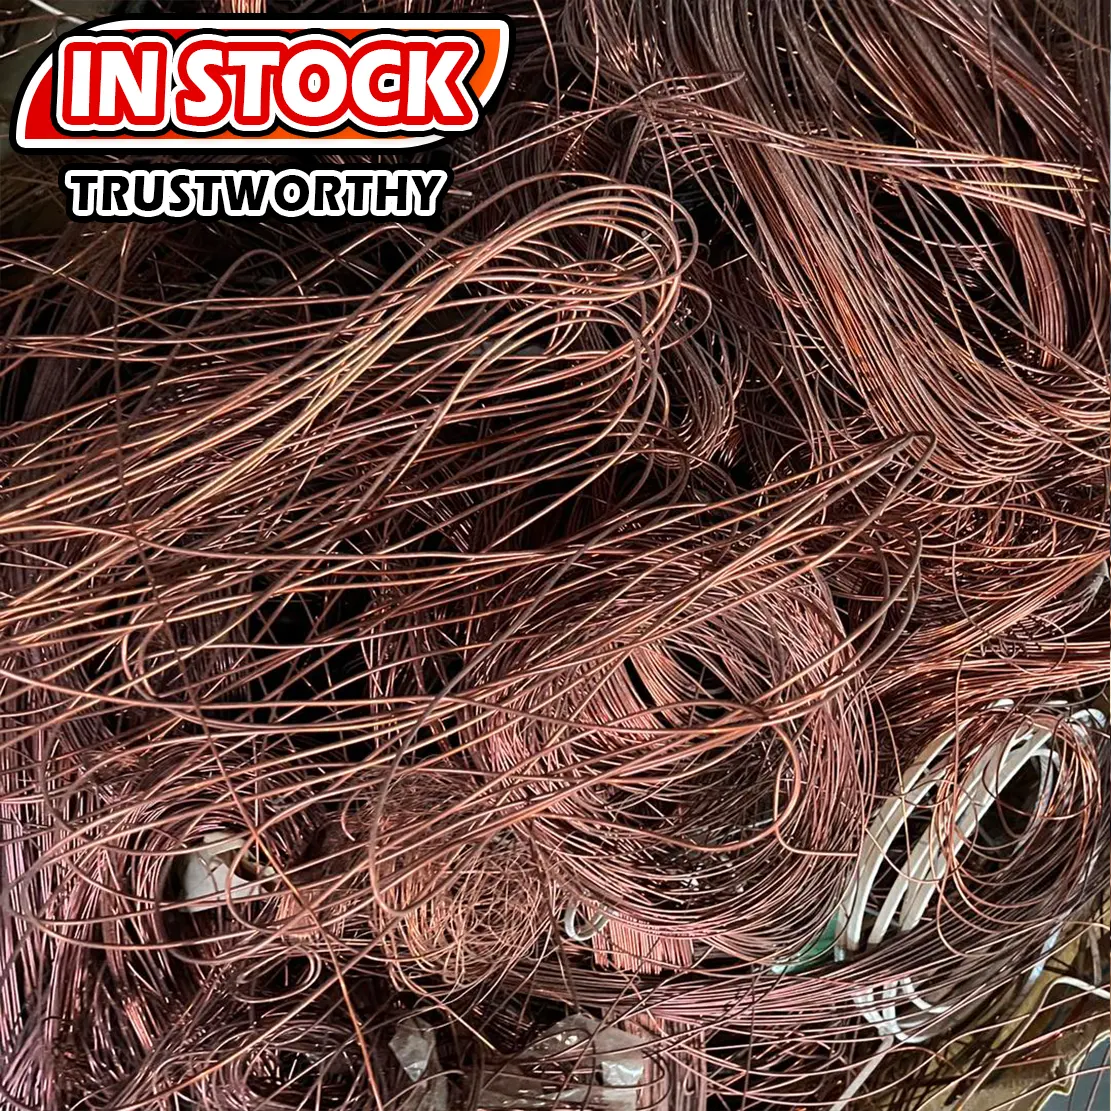 99.99% High Metal Pure Grade Bright Copper Mill-berry Wire Cable Bare waste scrap from Factory Wholesale